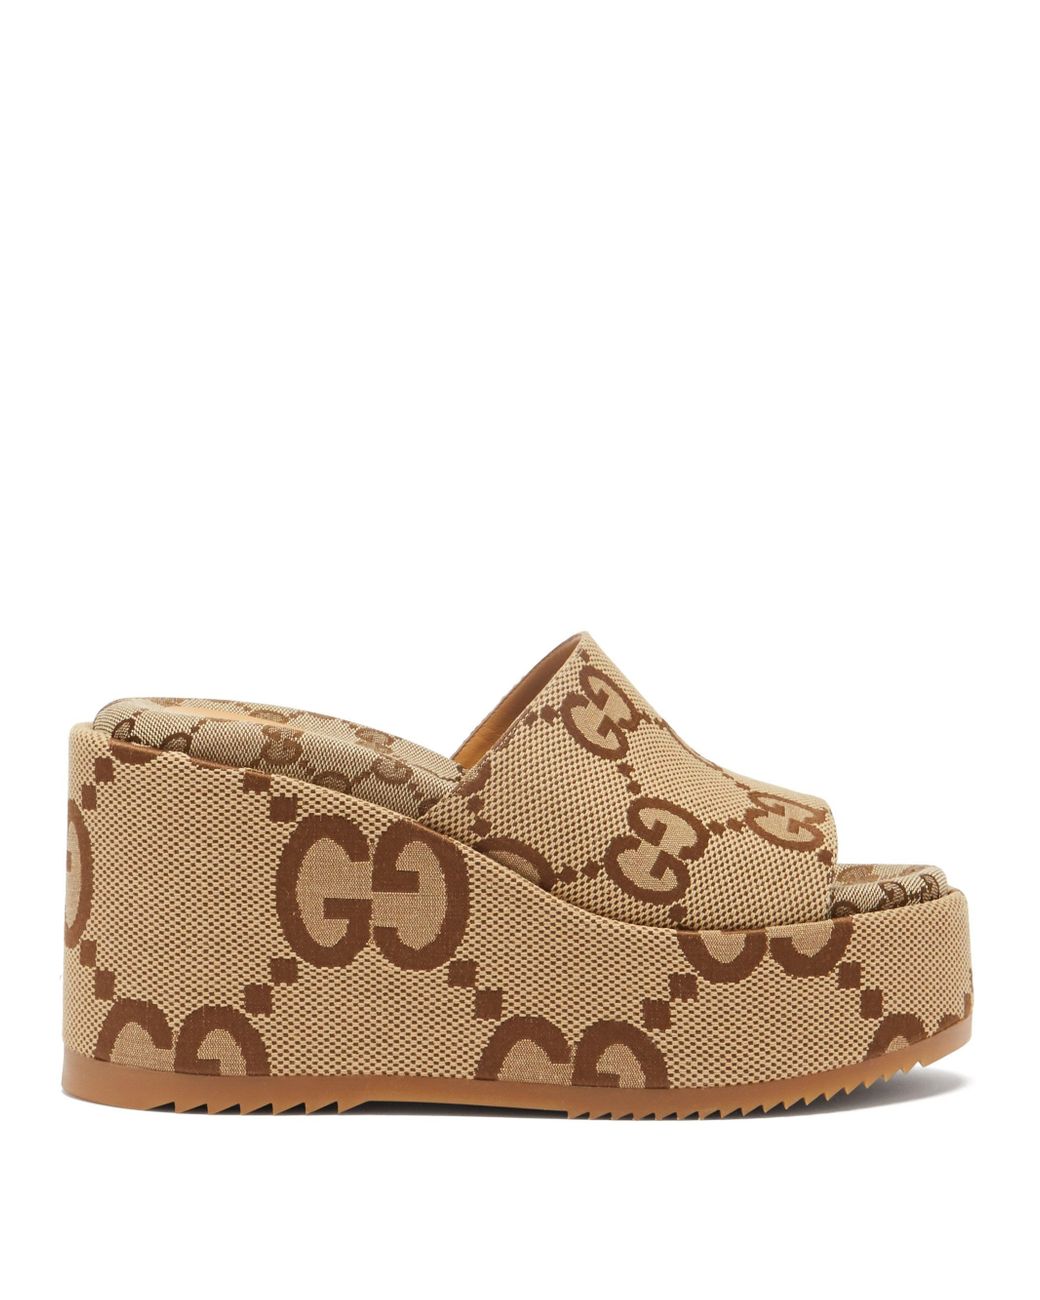 Gucci Angelina Gg-monogram Wedge Slides in Natural | Lyst Canada